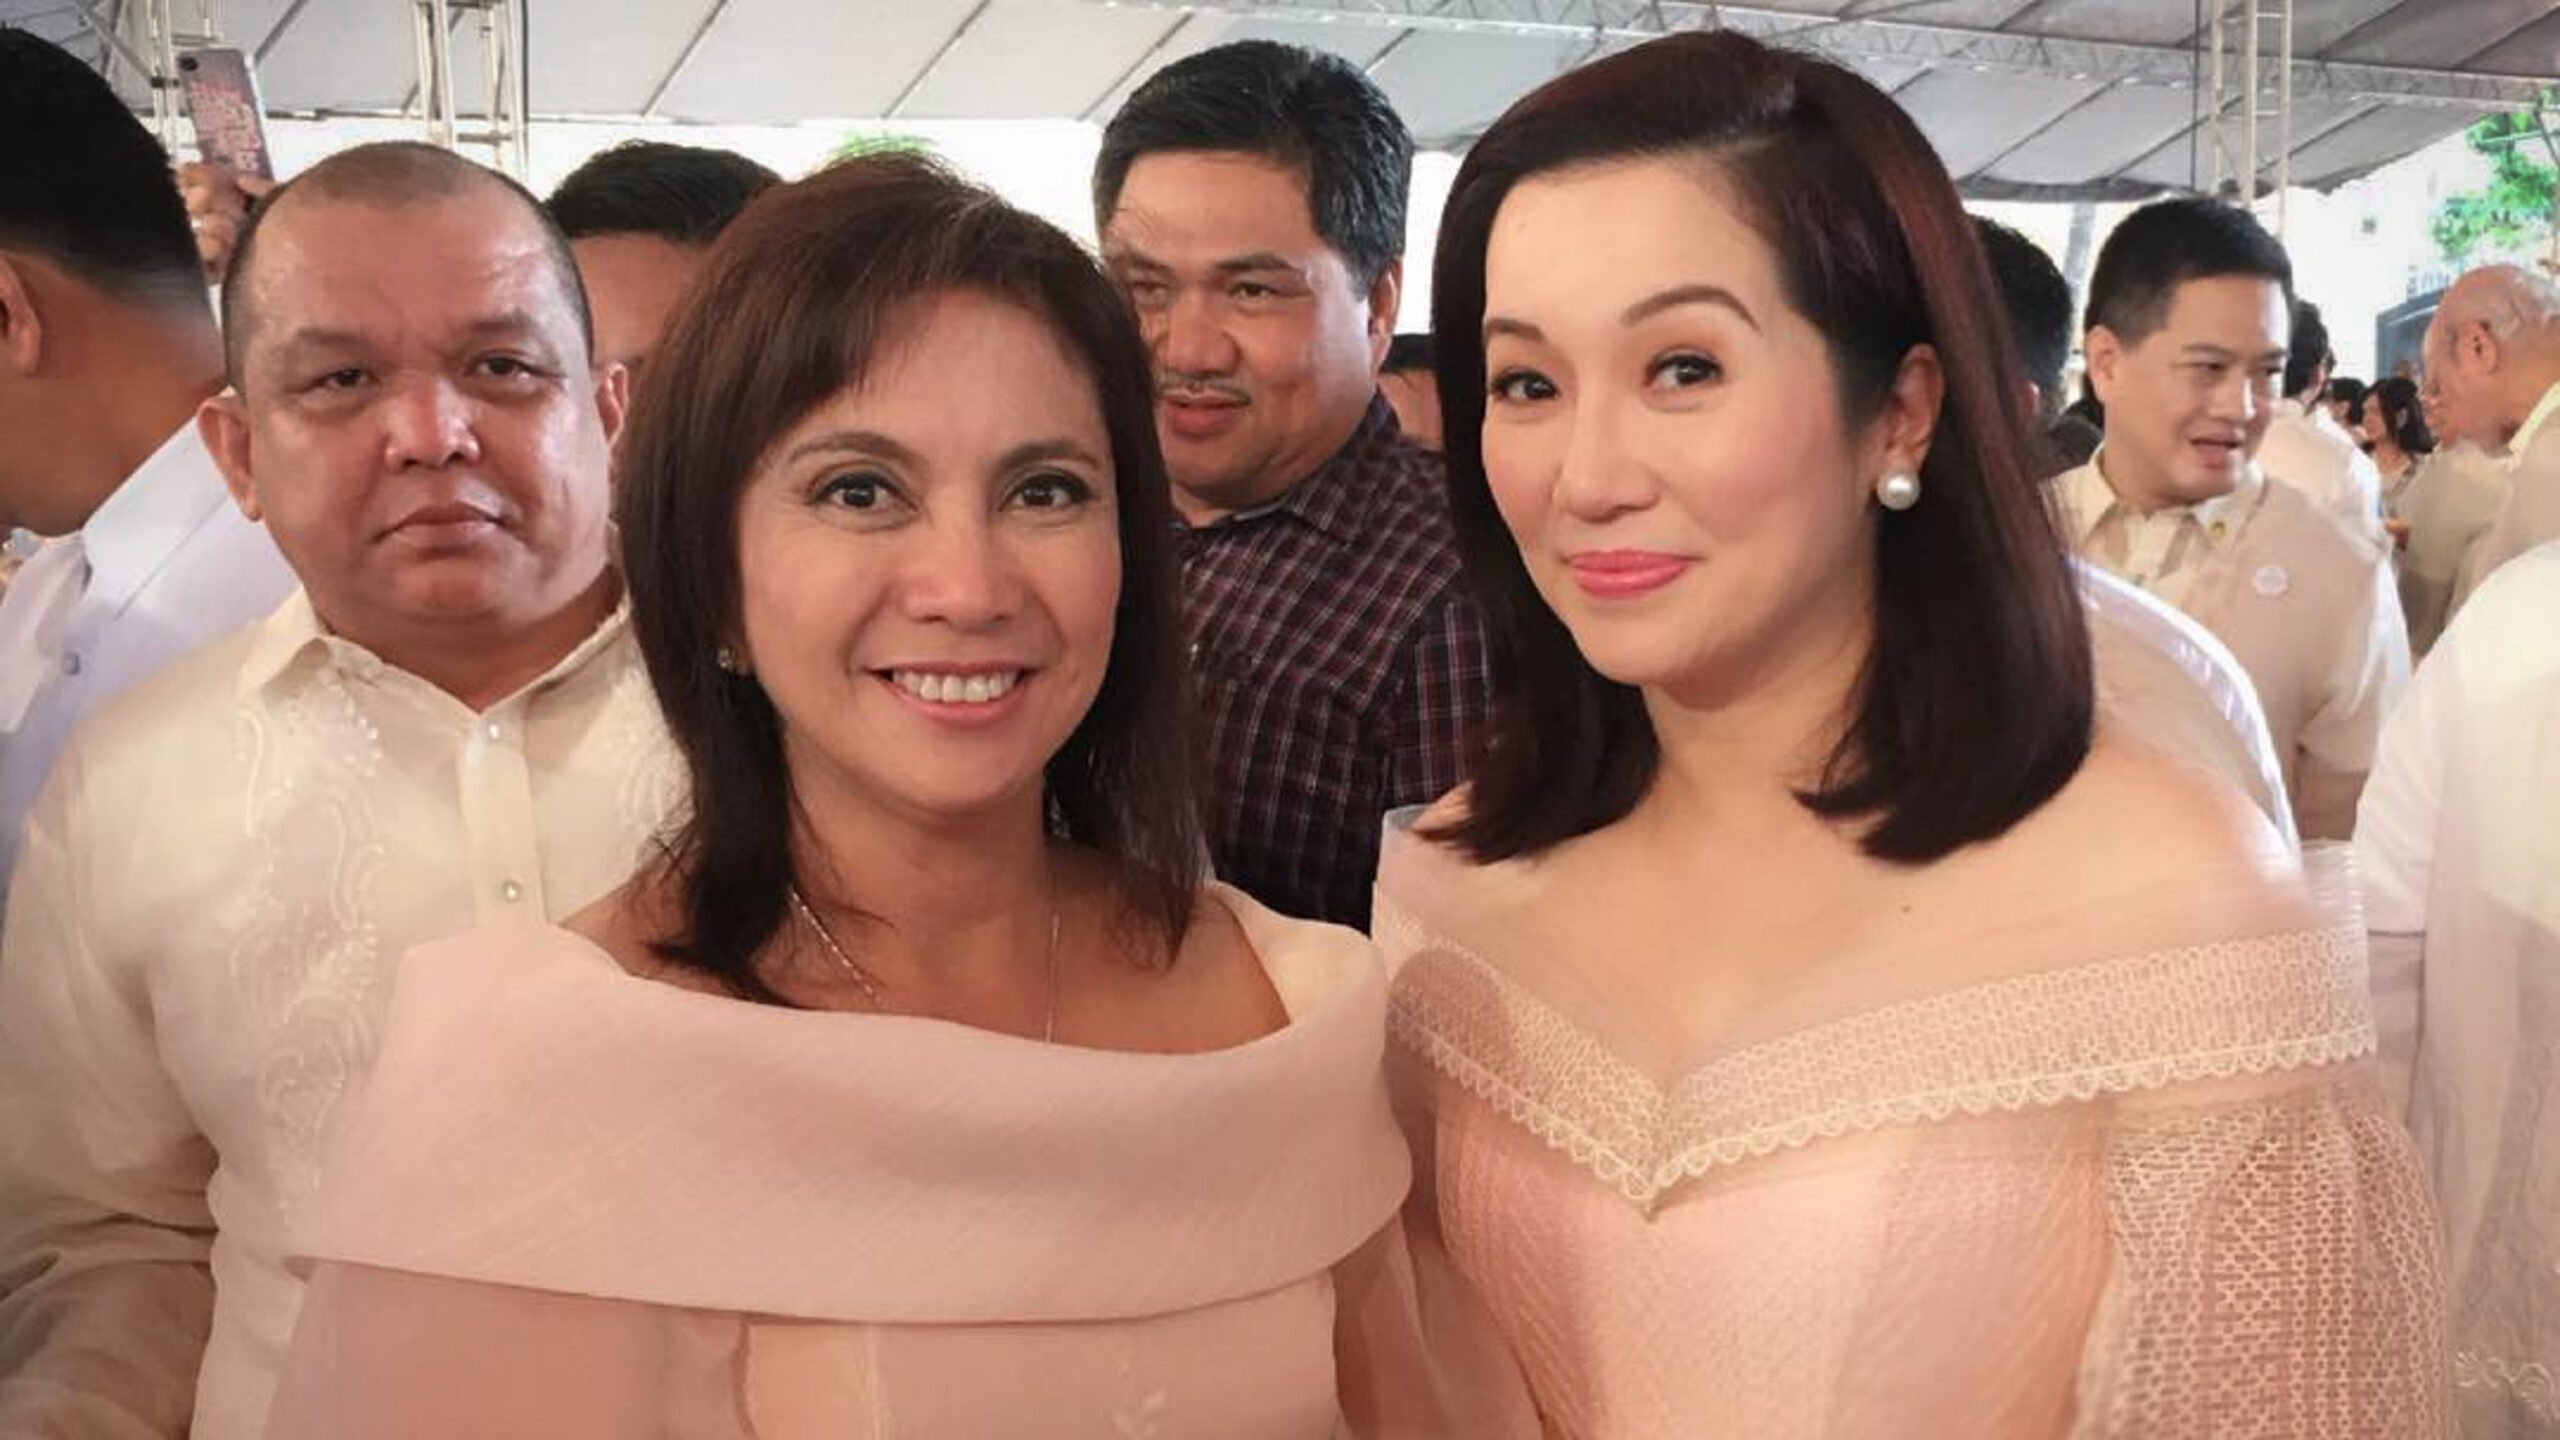 IN PHOTOS: What VP Leni, stars wore at inauguration